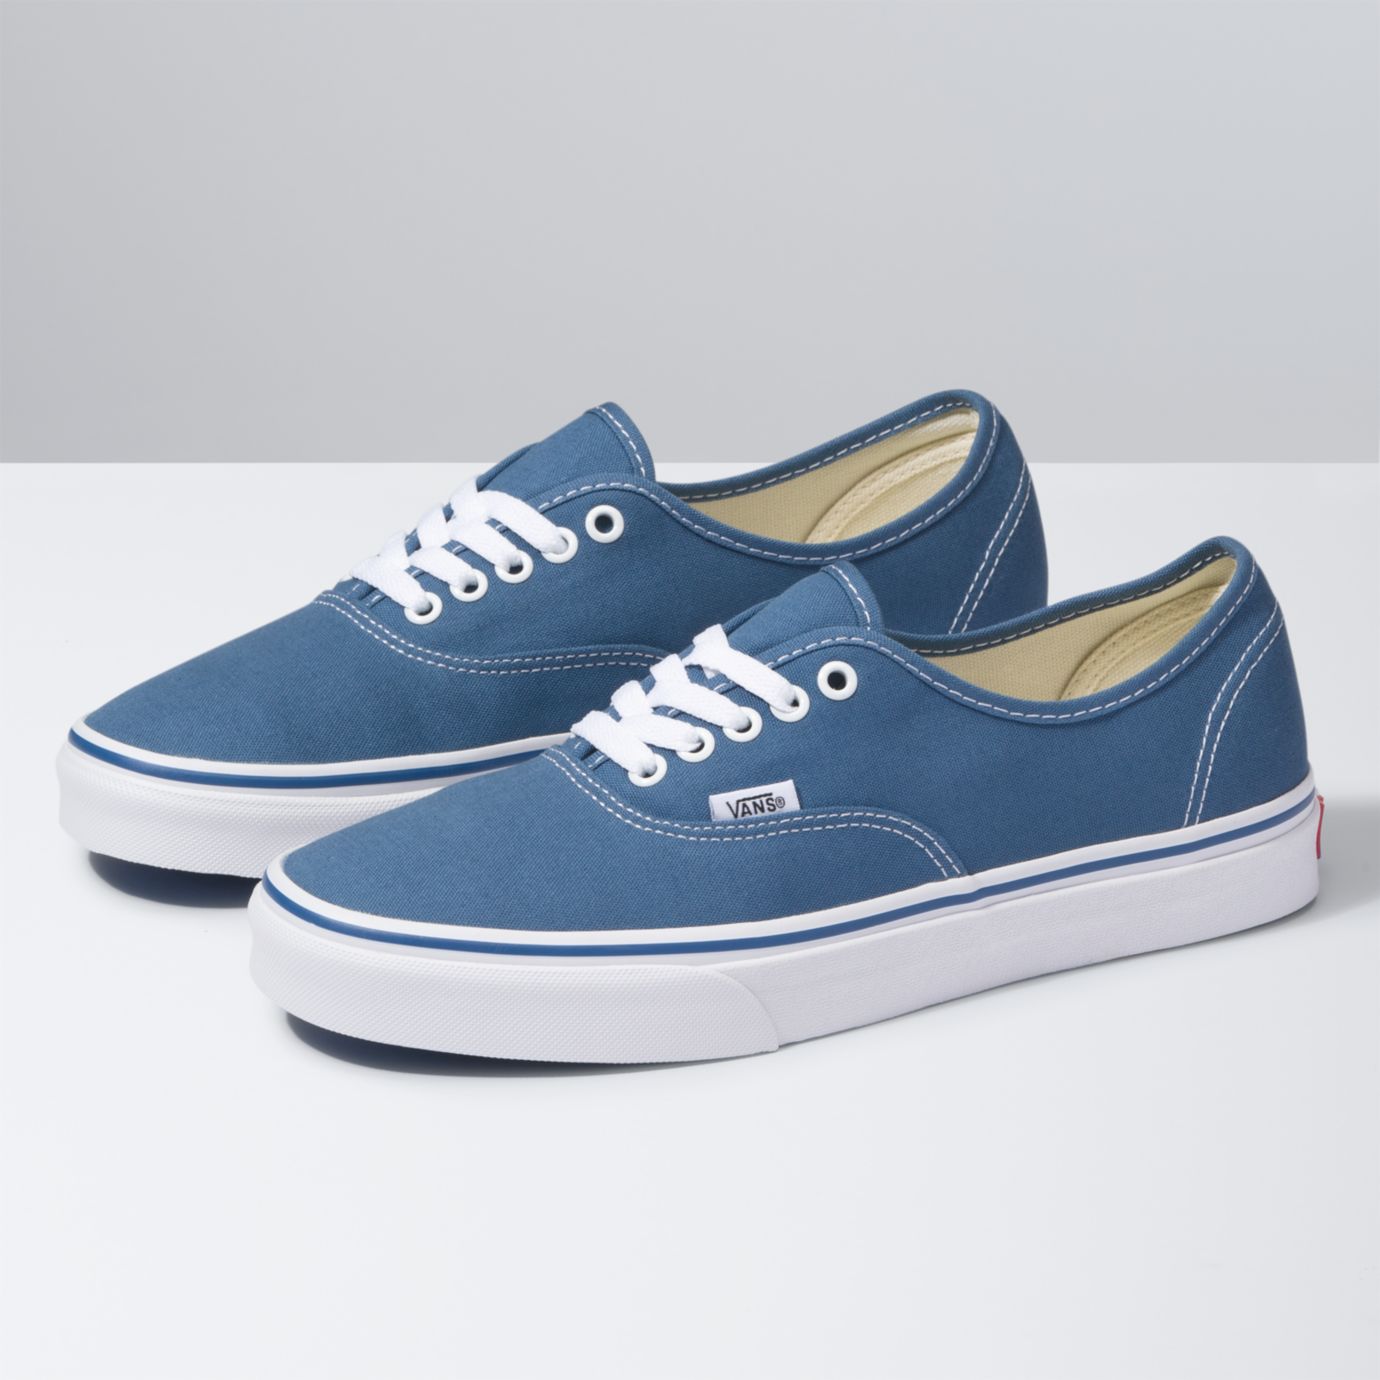 Vans Pro 50th Anniversary Collection Expands for